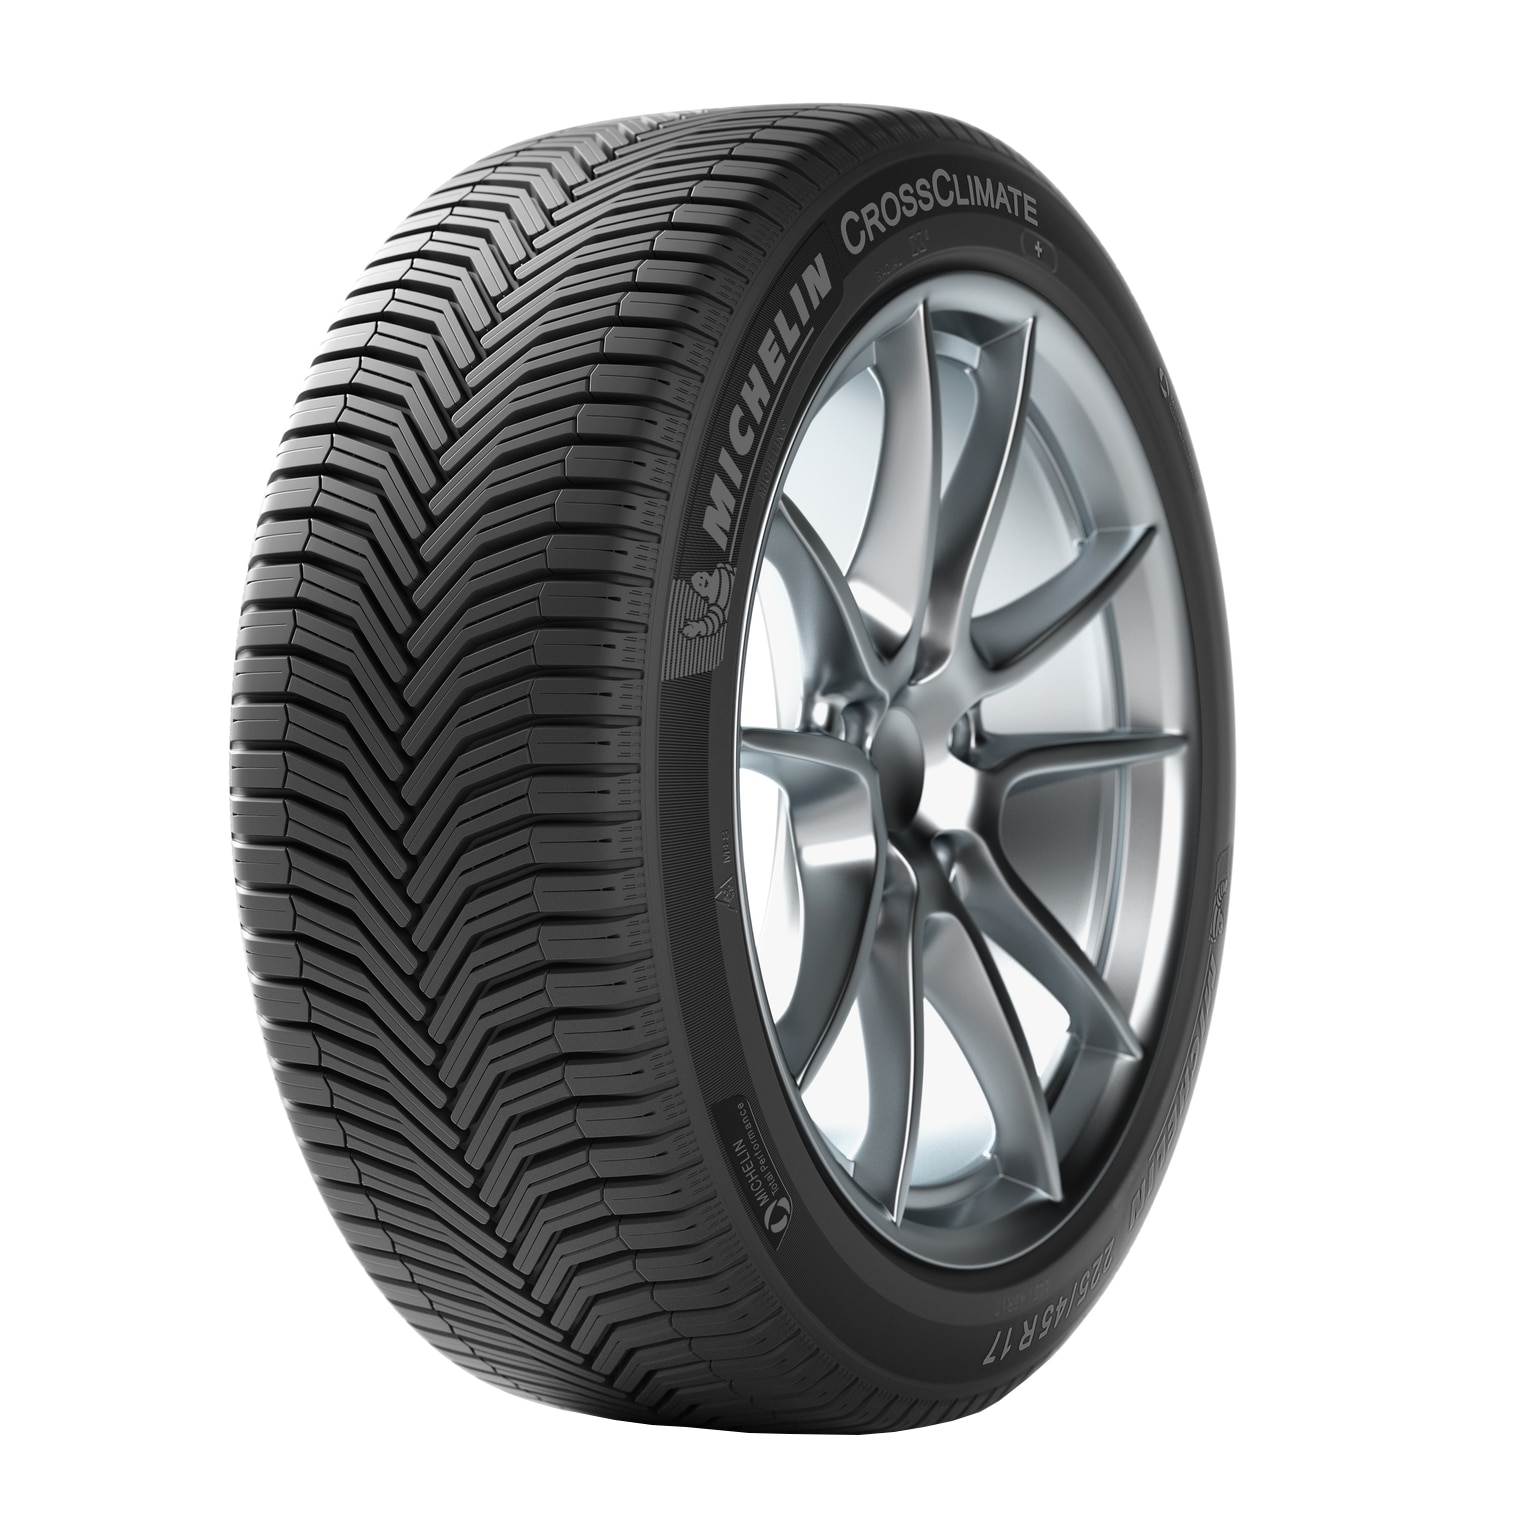 Anvelopa All Season Michelin CrossClimate+ R15 92T XL - eMAG.ro